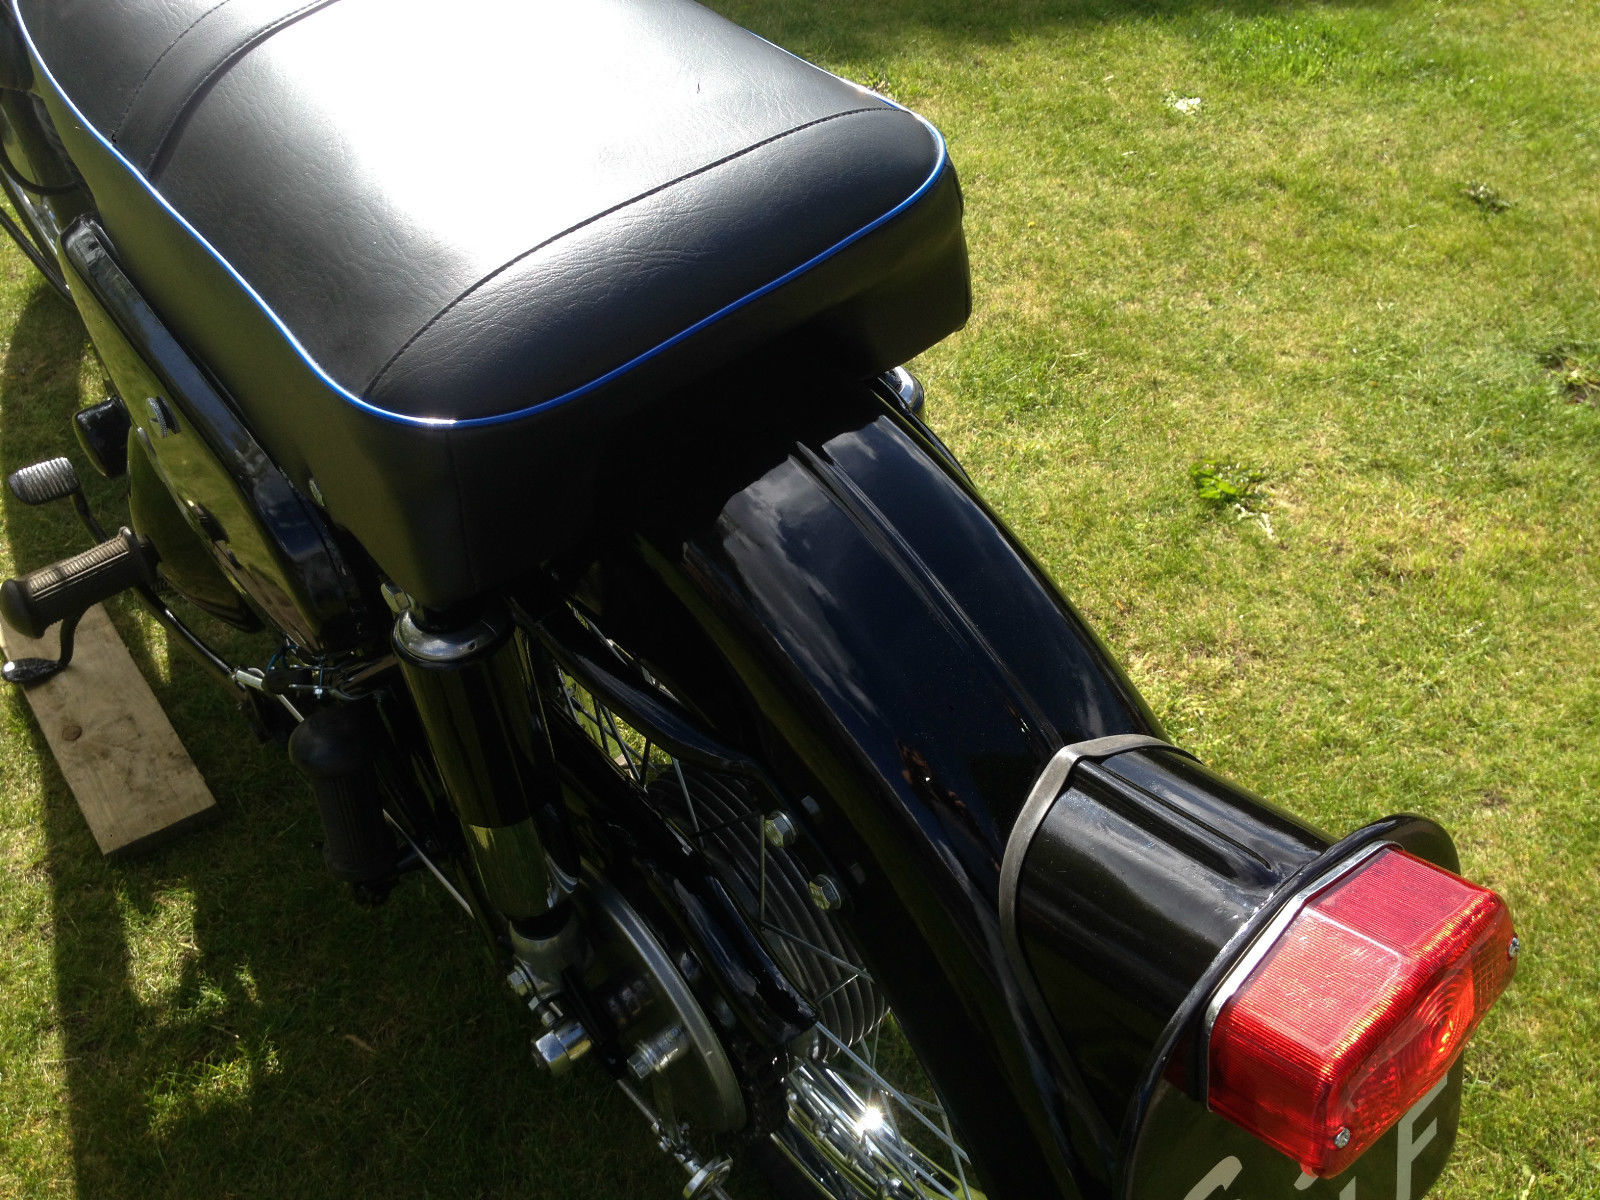 AJS 16MS - 1957 - Seat, Rear Fender and Tail Light.